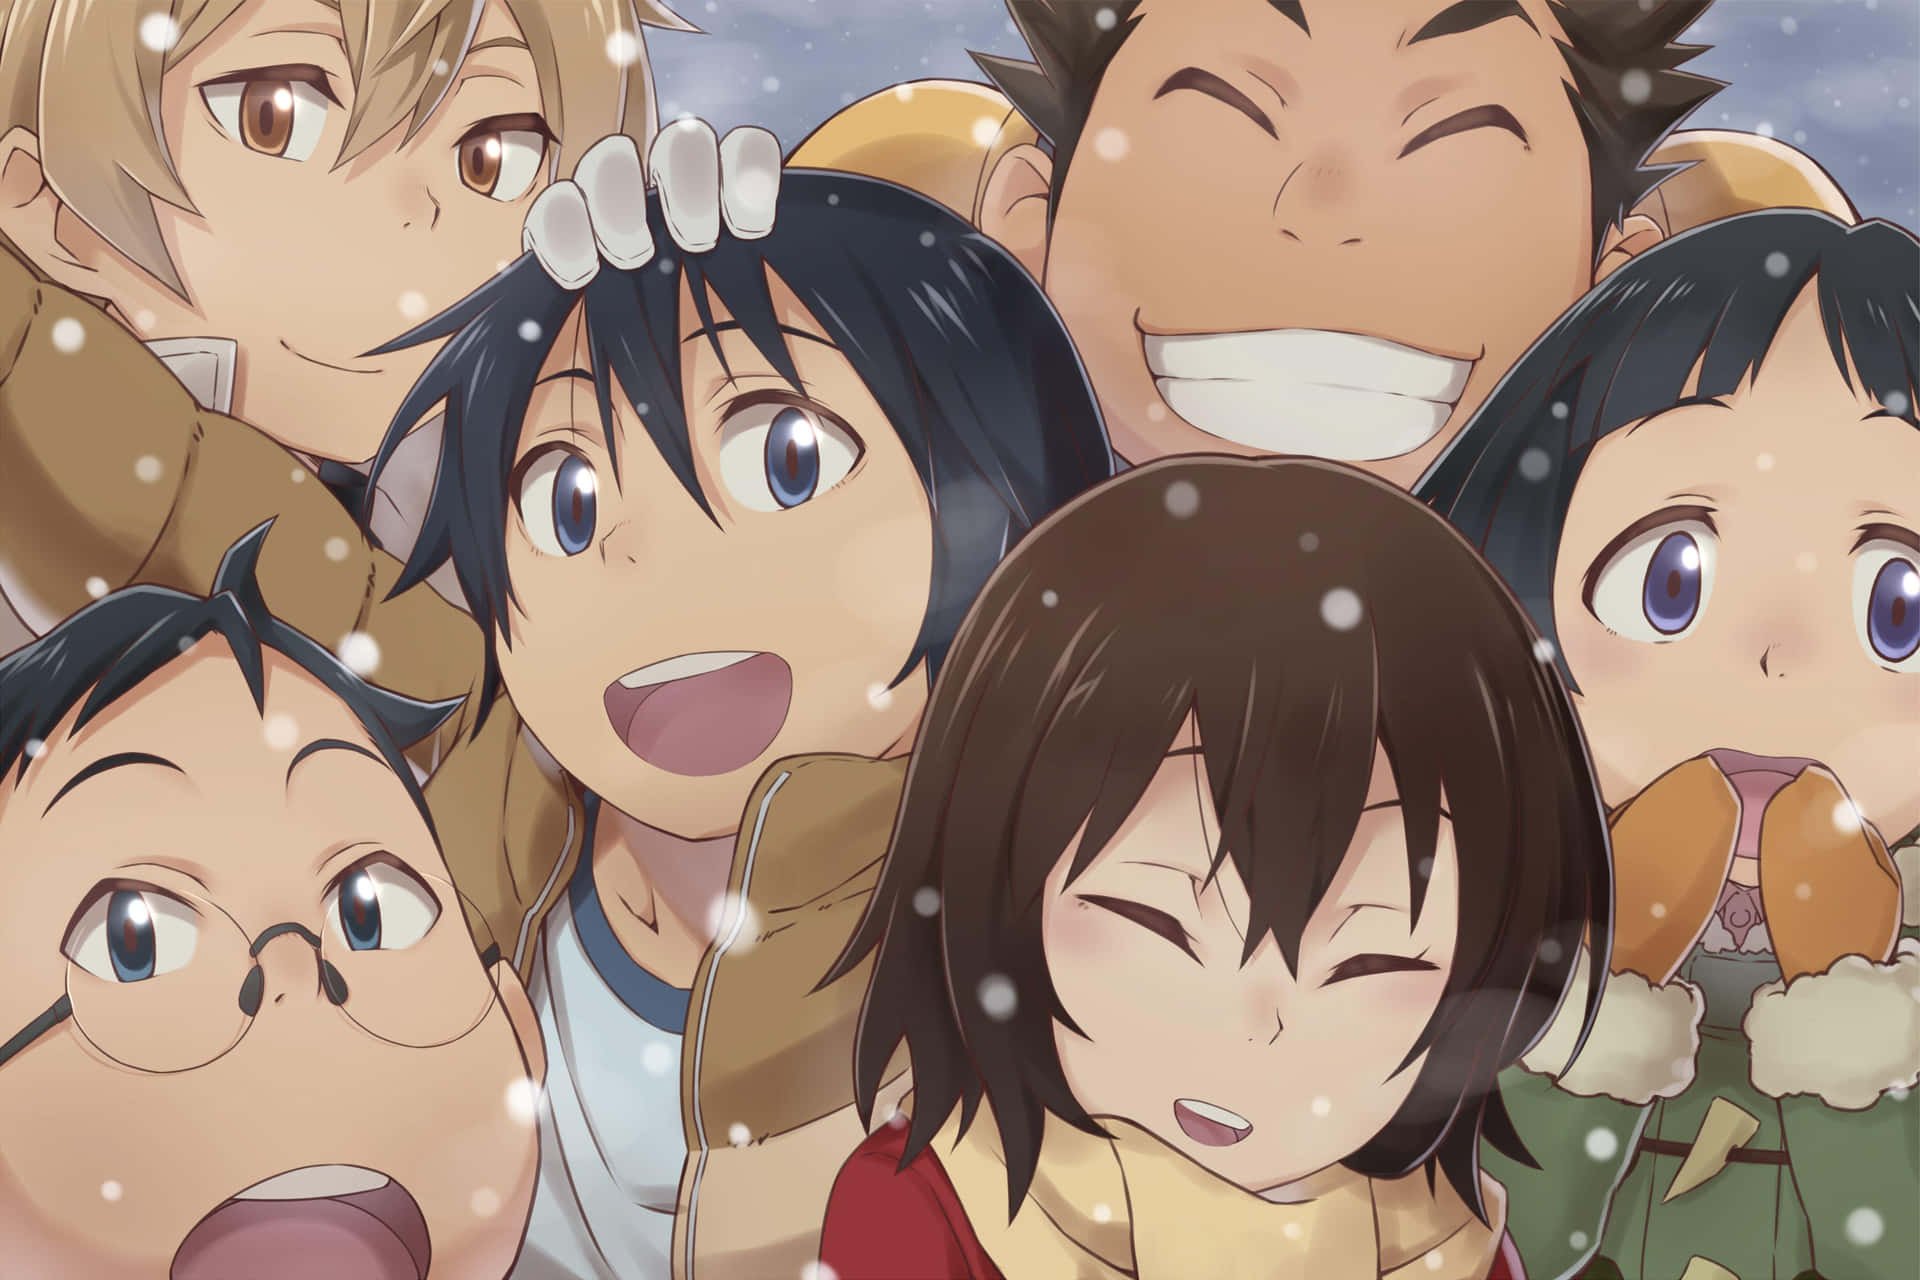 A Group Of Anime Characters Are Smiling In The Snow